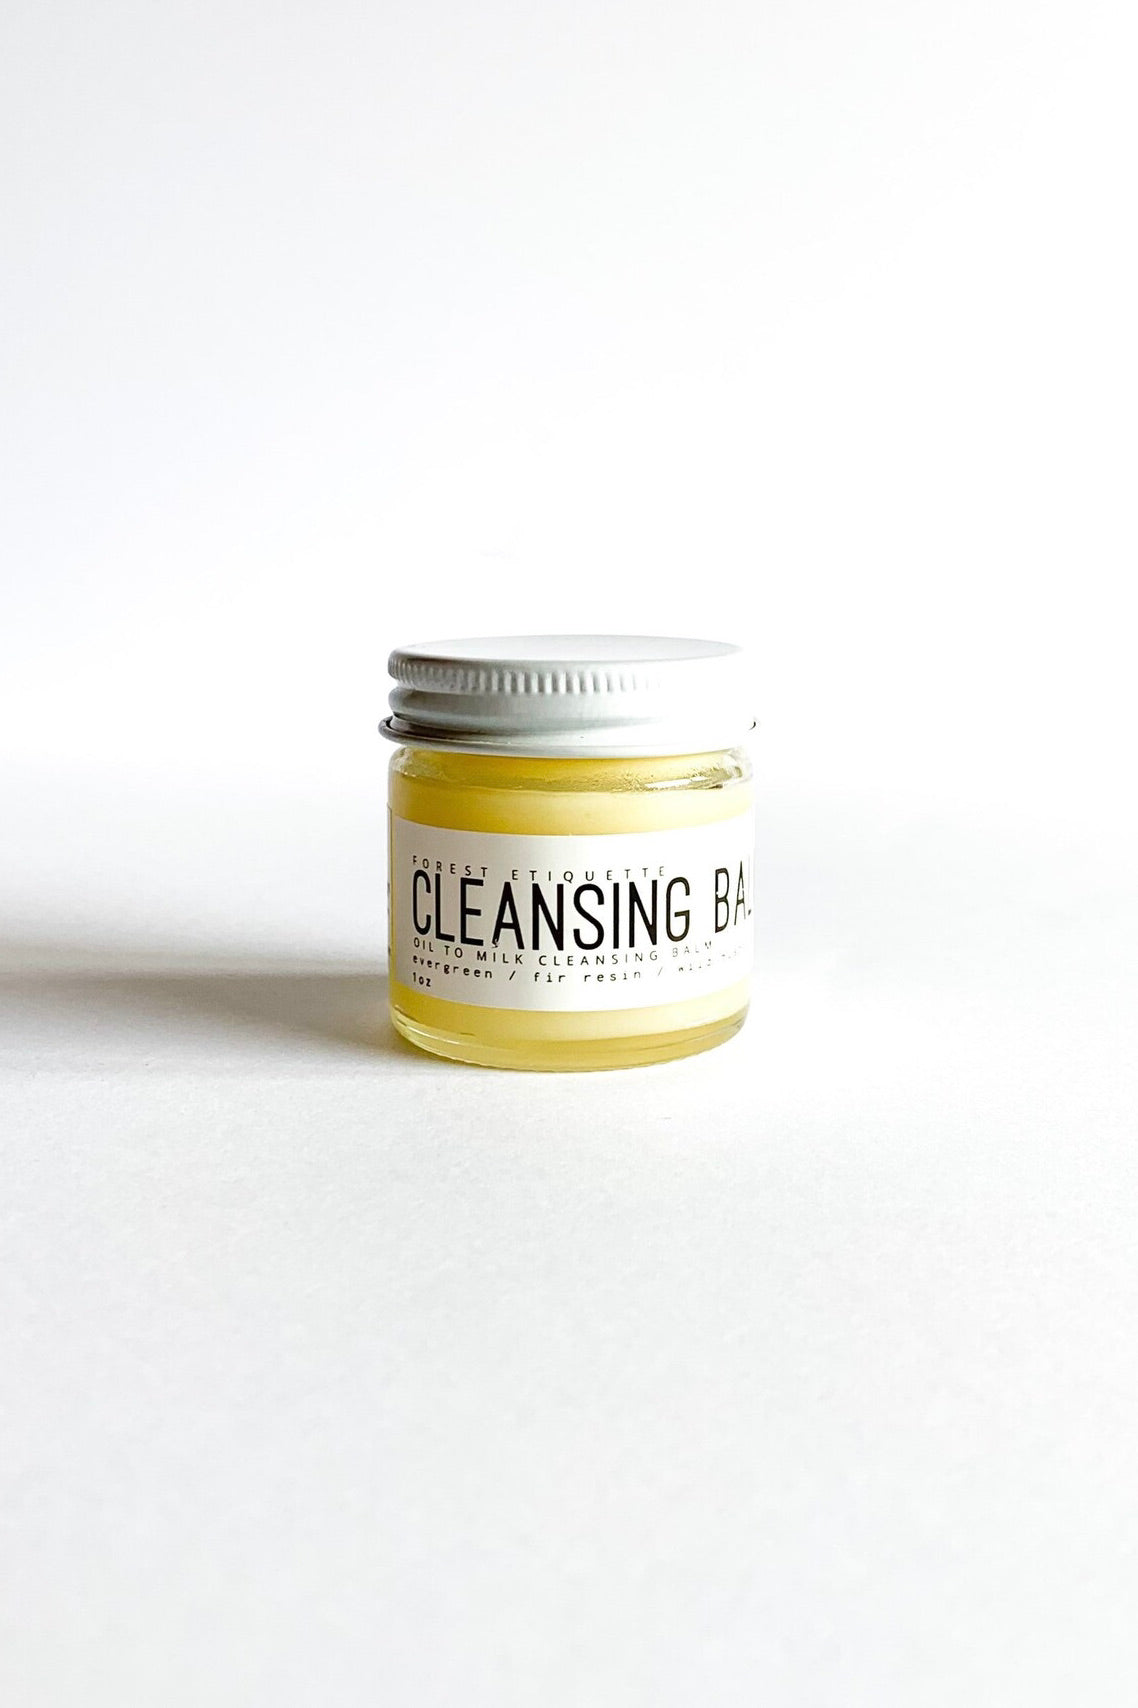 Forest Etiquette Cleansing Balm herb + Mushroom Facial Cleanser